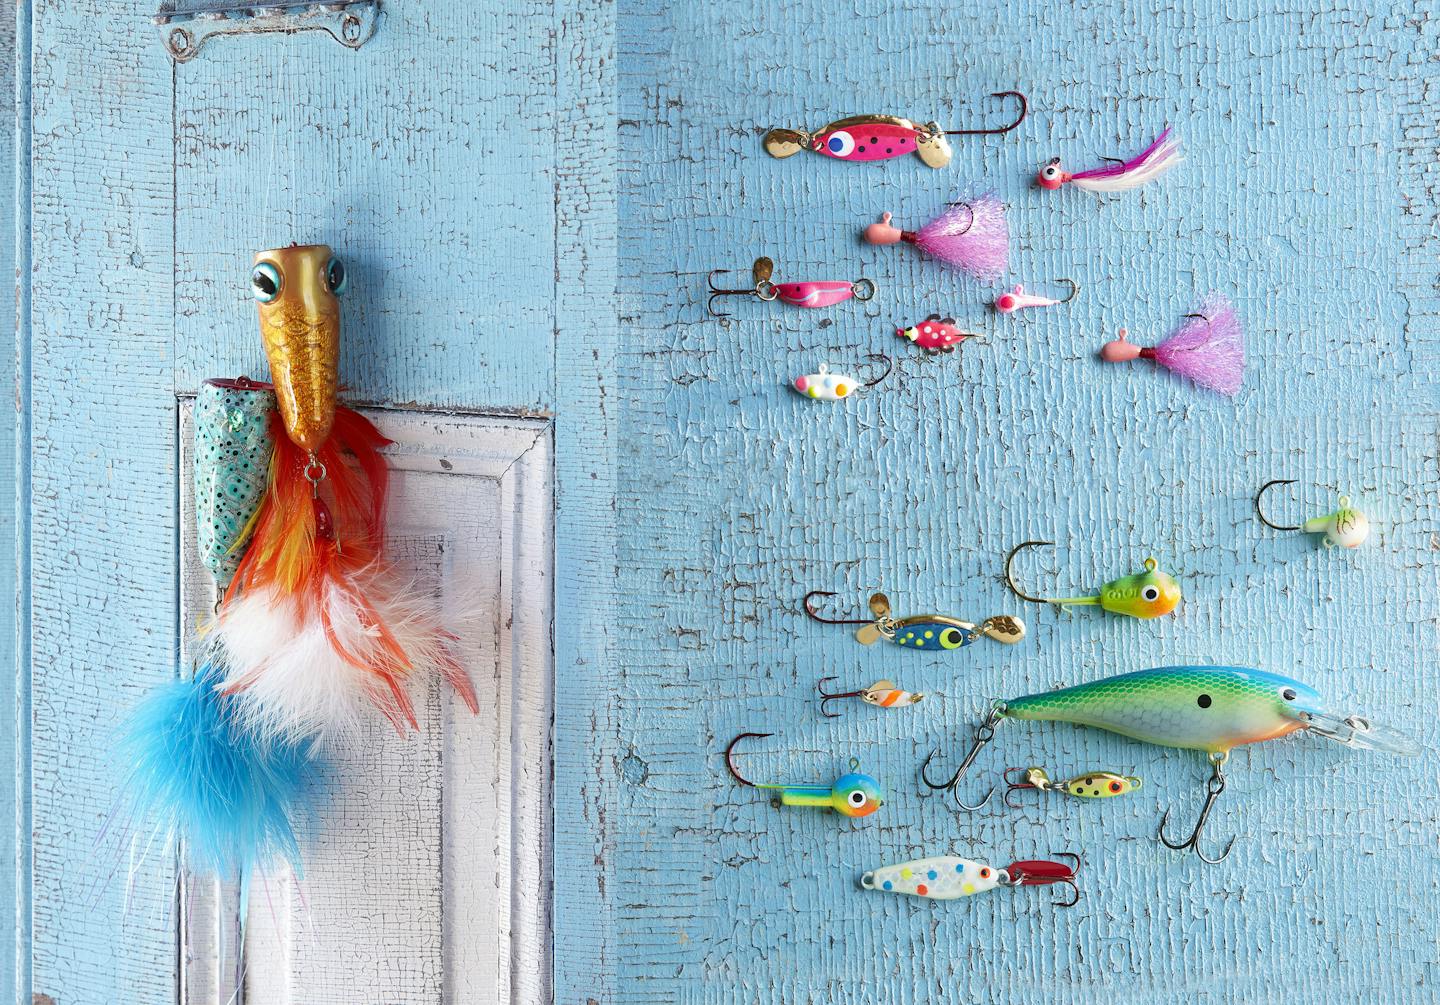 Home - Snyders Lures